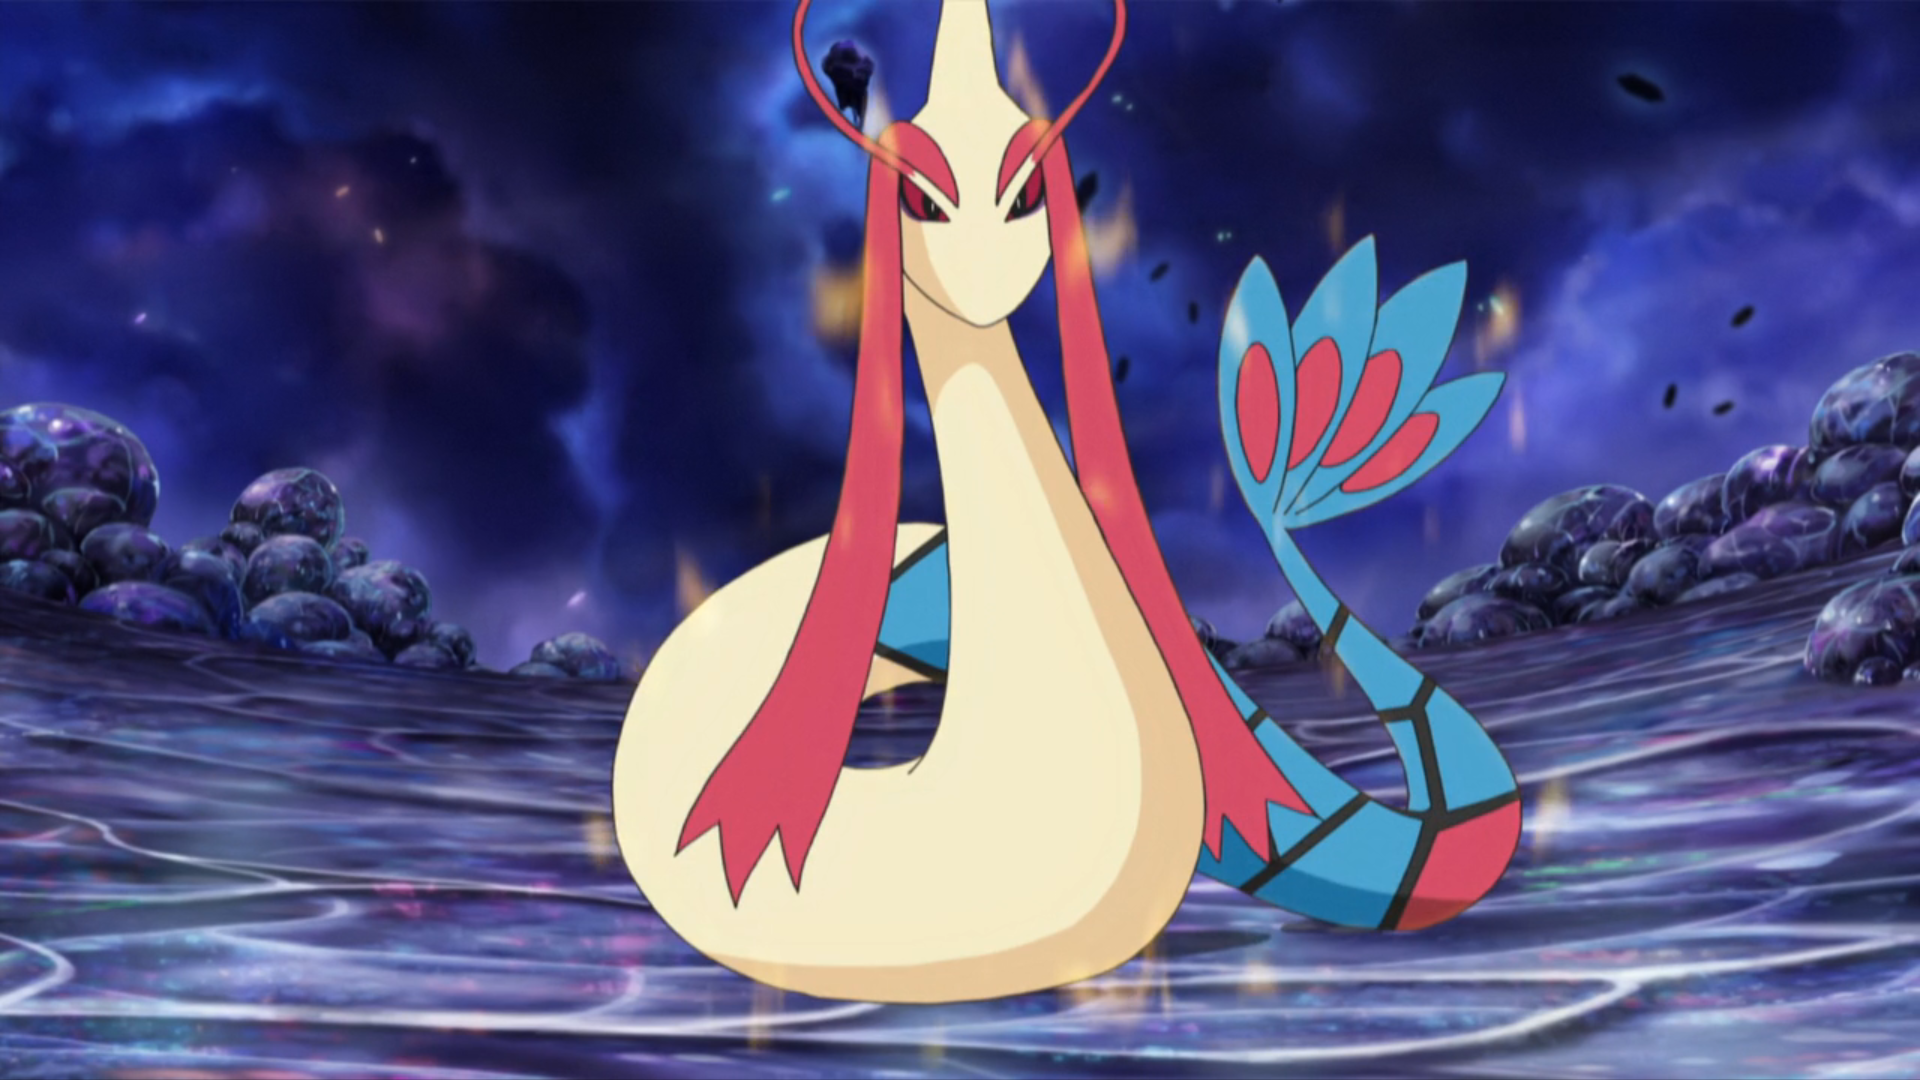 Playing videos games since the 90s — Man Milotic is still always dangerous  in the...